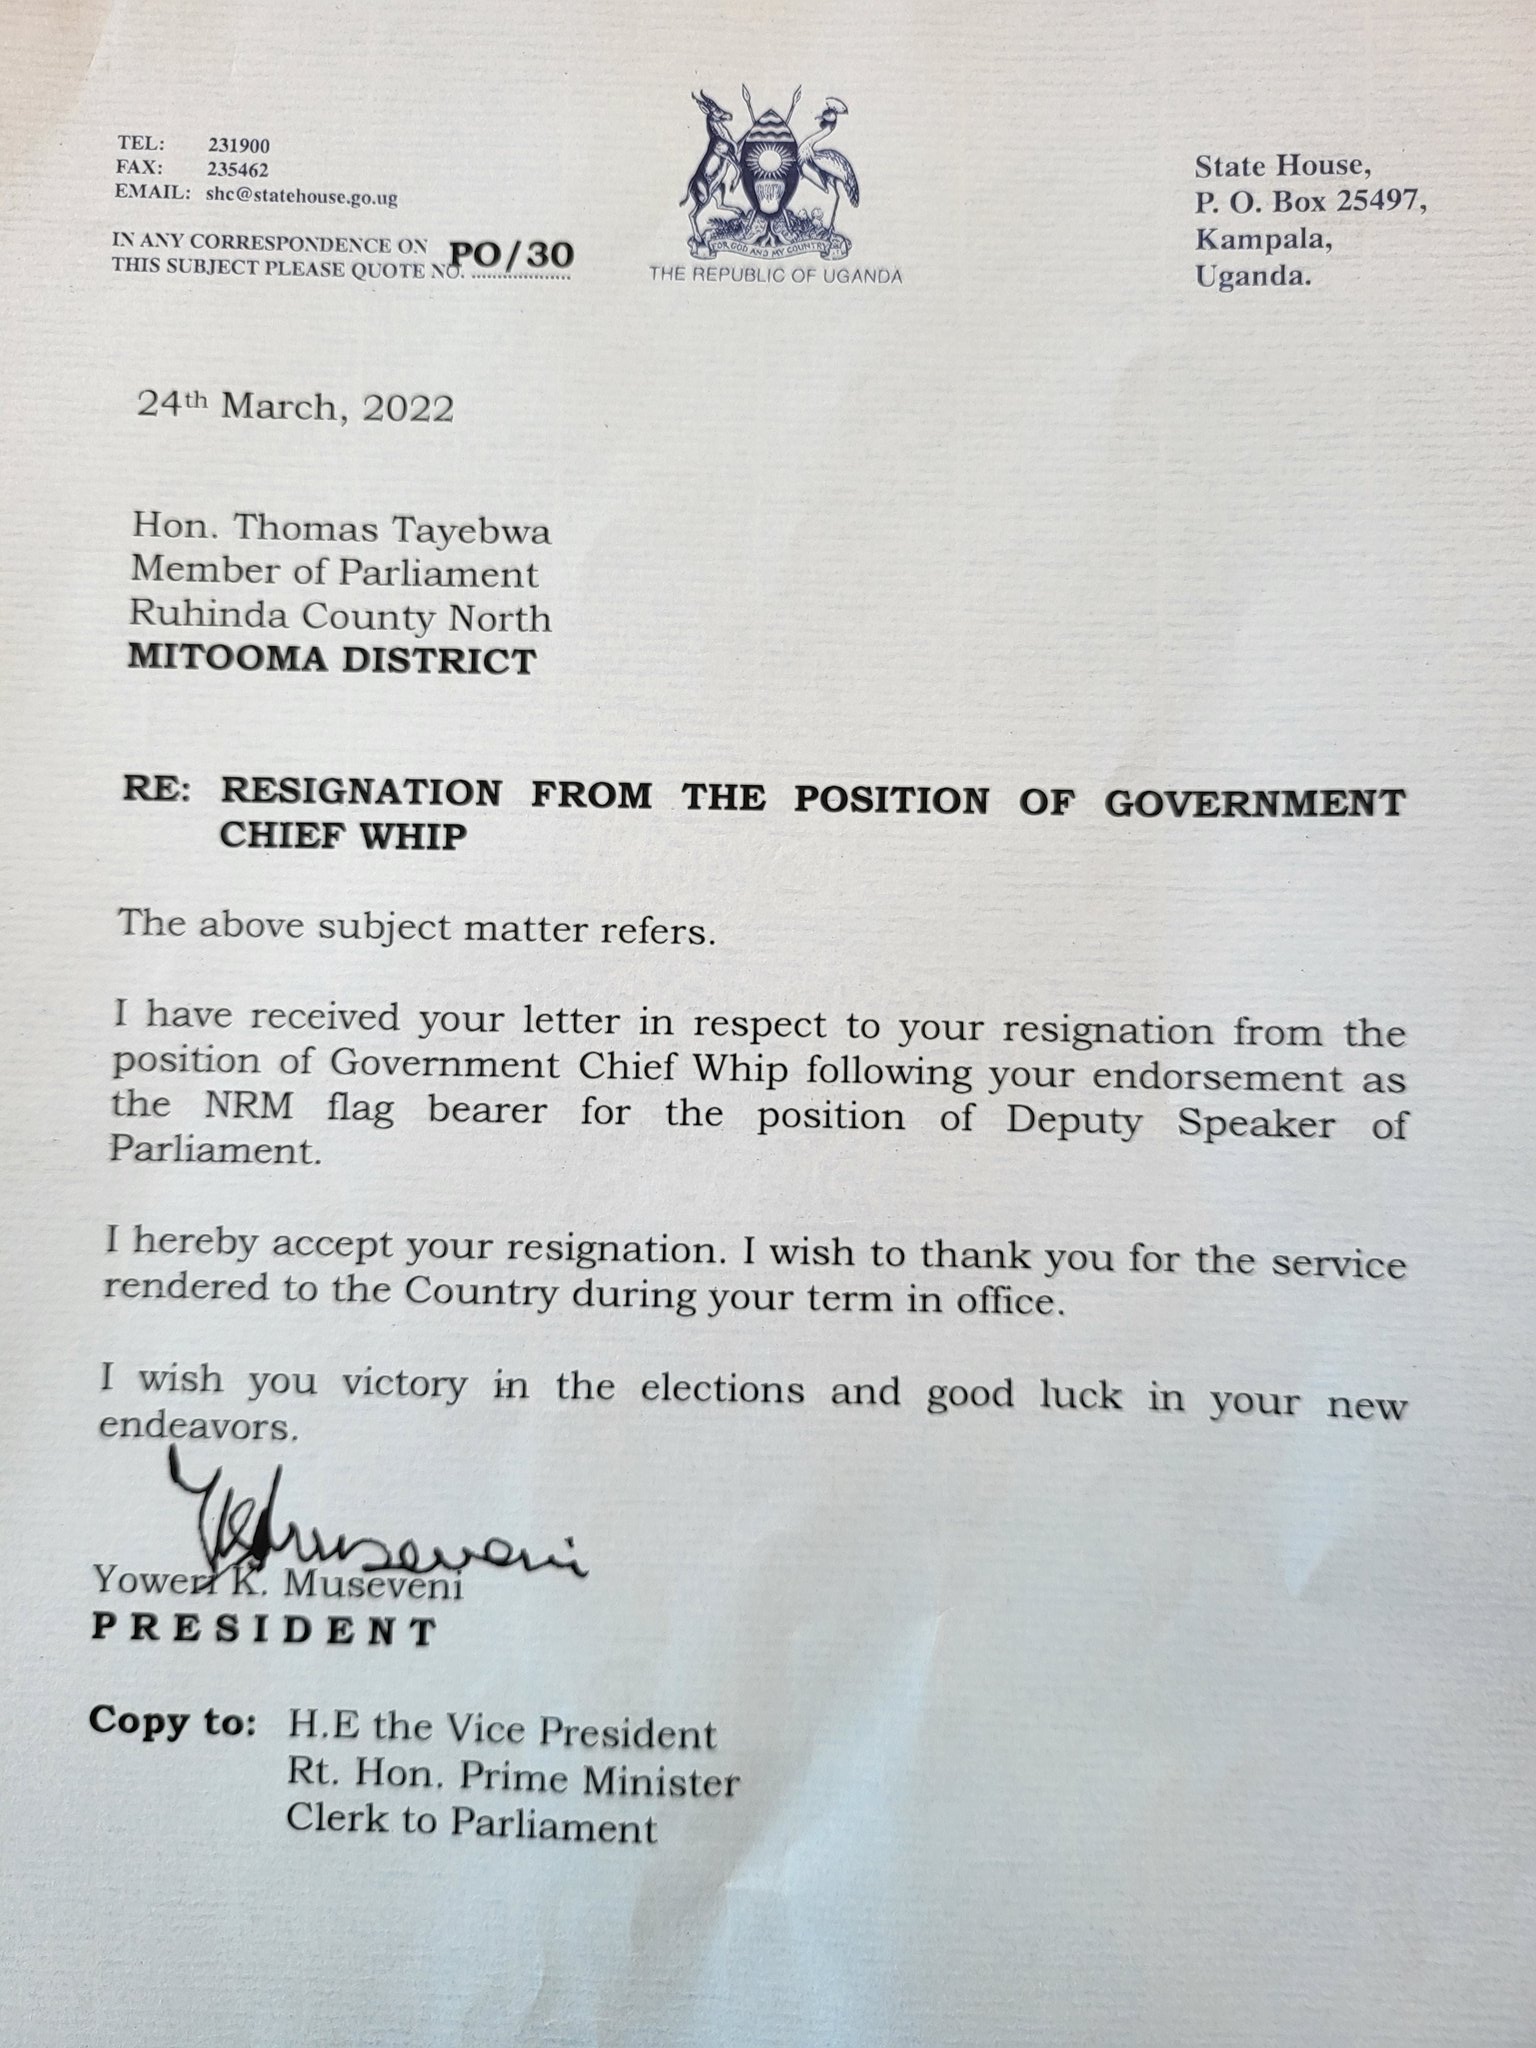 JUST IN: Thomas Tayebwa Resigns Government Chief Whip Job Ahead of Deputy Speaker Election; Museveni Accepts Tayebwa's Resignation